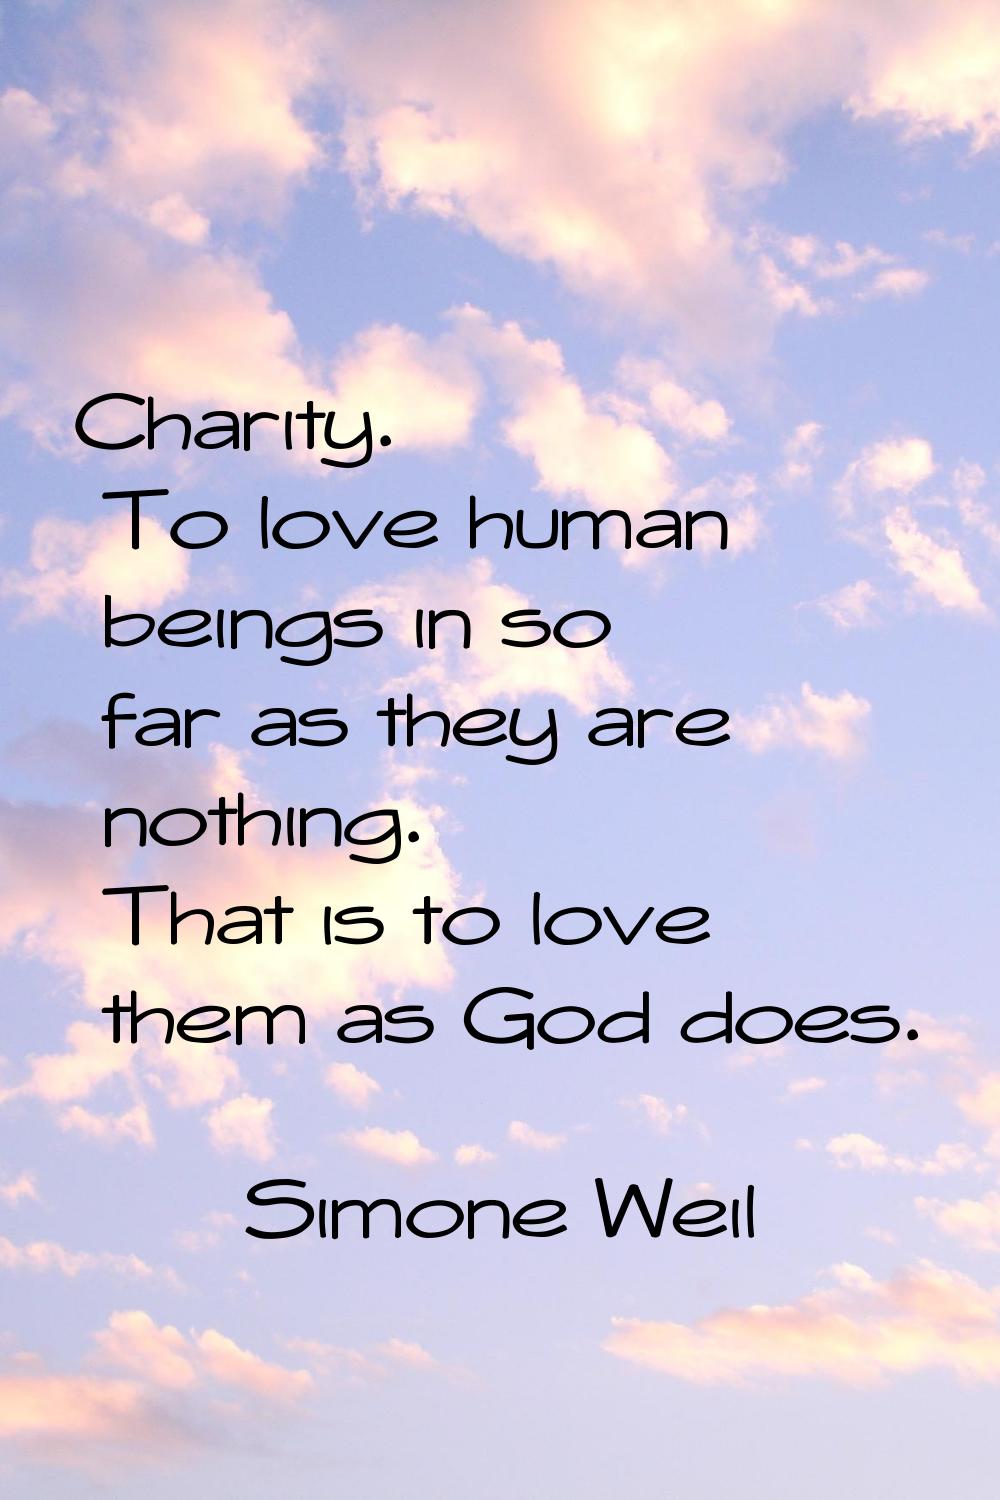 Charity. To love human beings in so far as they are nothing. That is to love them as God does.